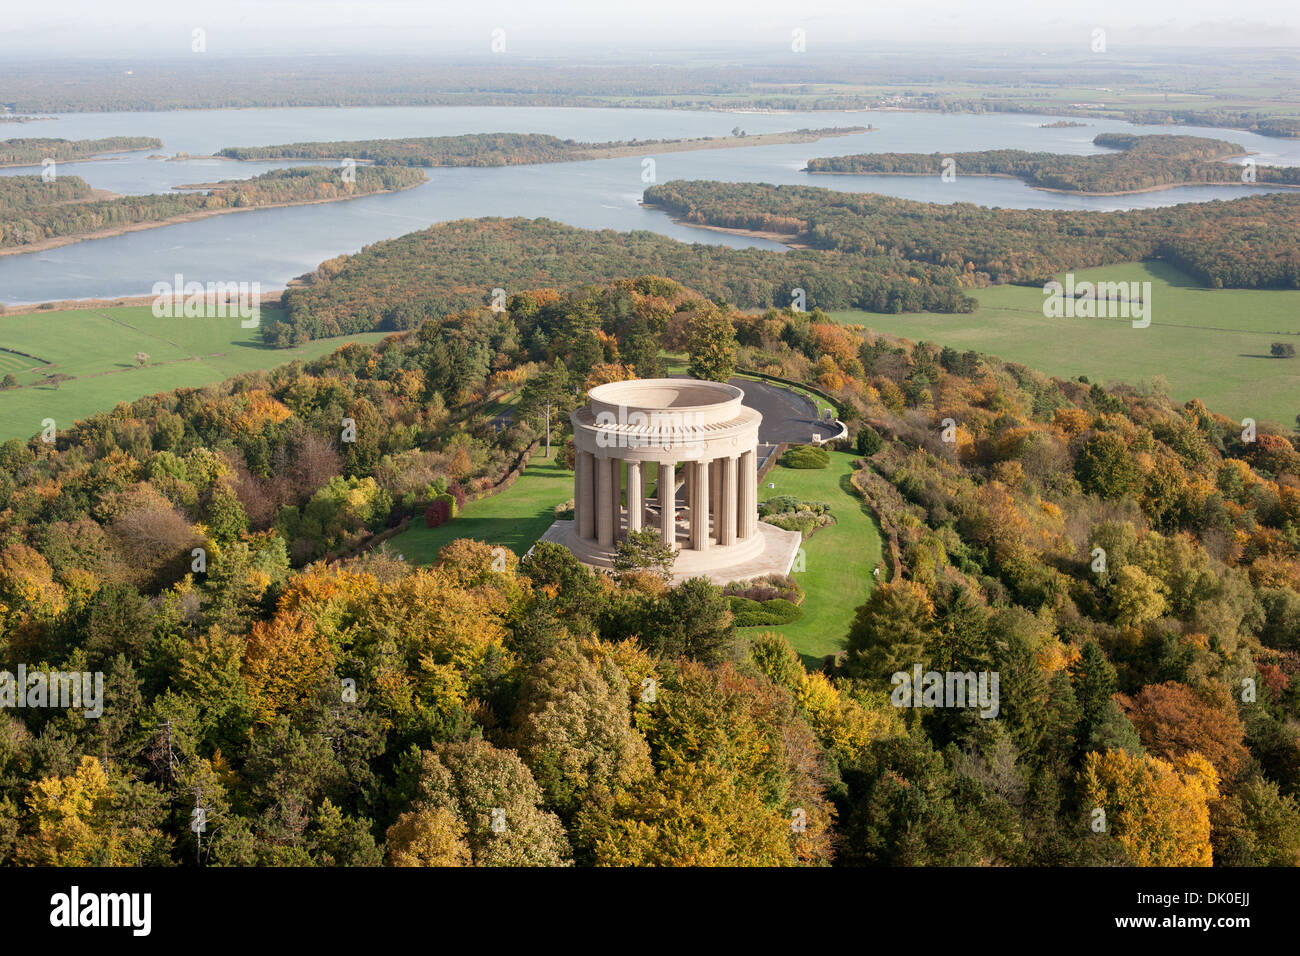 AERIAL VIEW. World War I memorial to U.S. fallen soldiers overlooking Lake Madine. Montsec American Monument, Meuse, Lorraine, Grand Est, France. Stock Photo